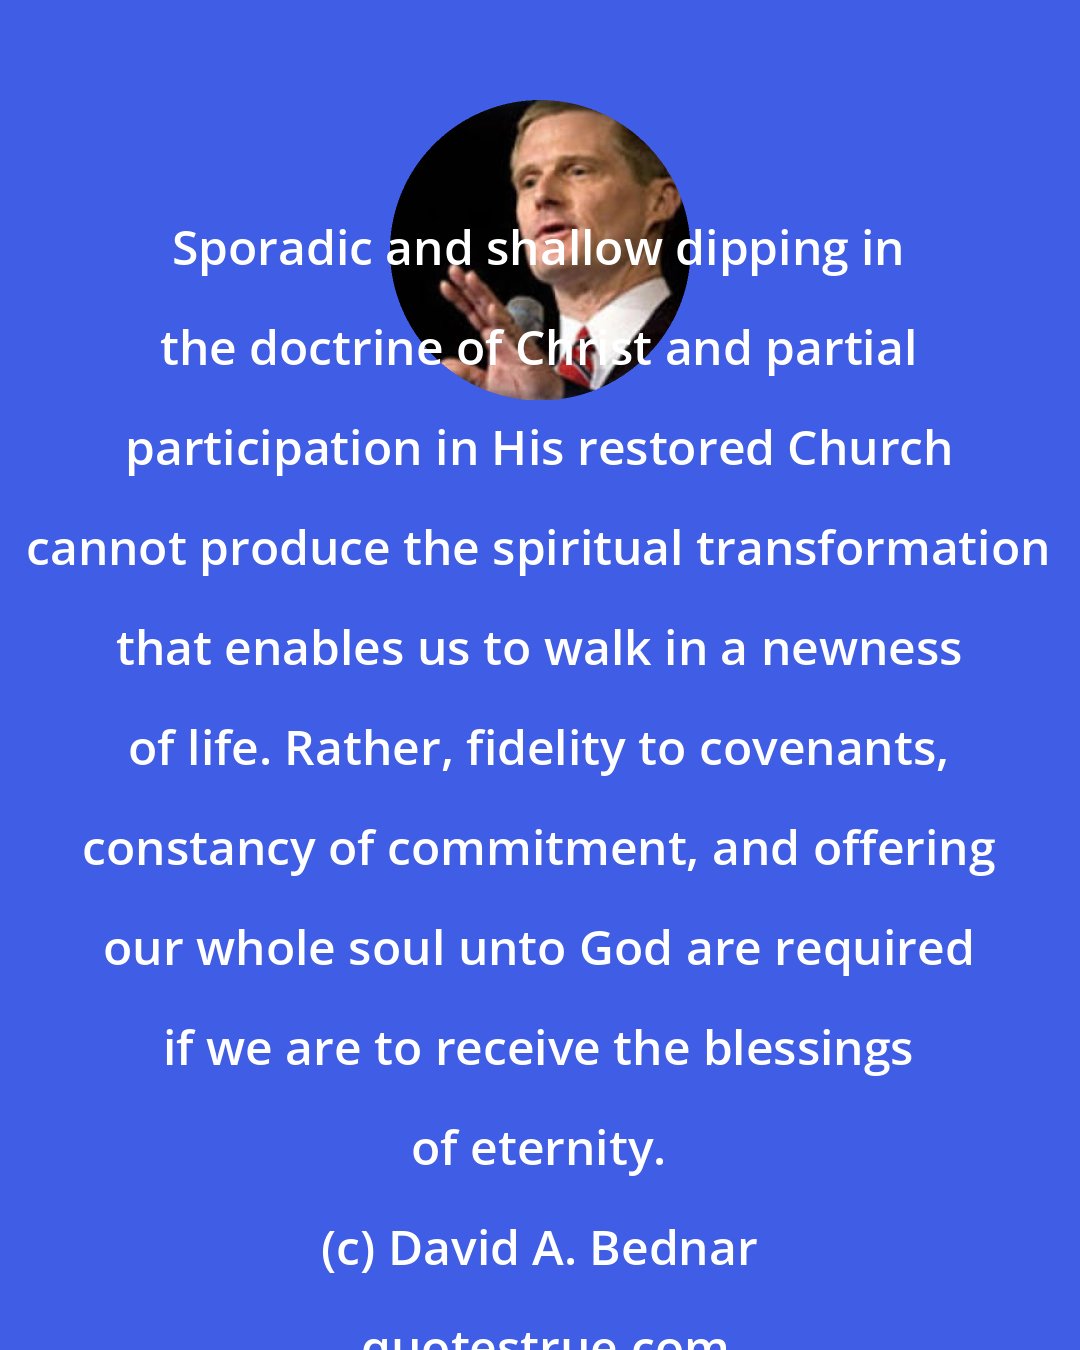 David A. Bednar: Sporadic and shallow dipping in the doctrine of Christ and partial participation in His restored Church cannot produce the spiritual transformation that enables us to walk in a newness of life. Rather, fidelity to covenants, constancy of commitment, and offering our whole soul unto God are required if we are to receive the blessings of eternity.